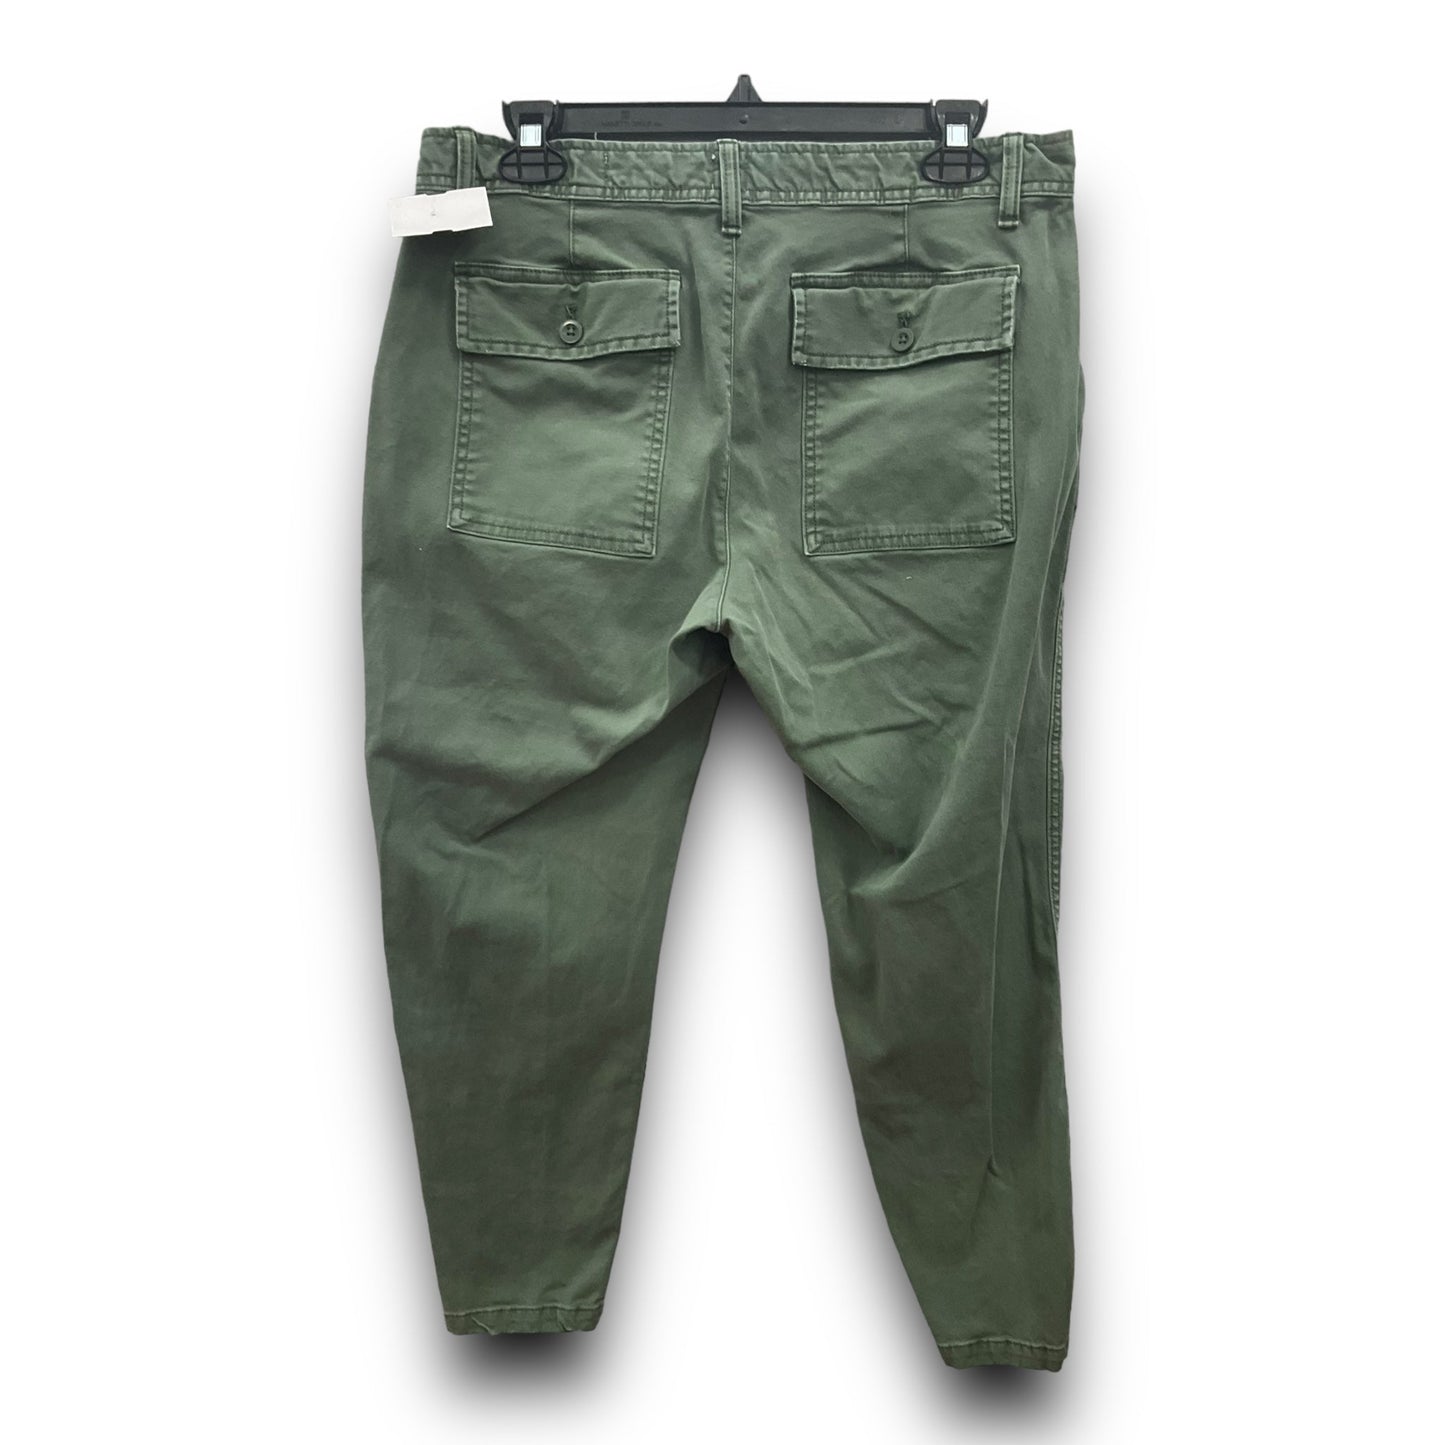 Green Pants Other Gap, Size 10